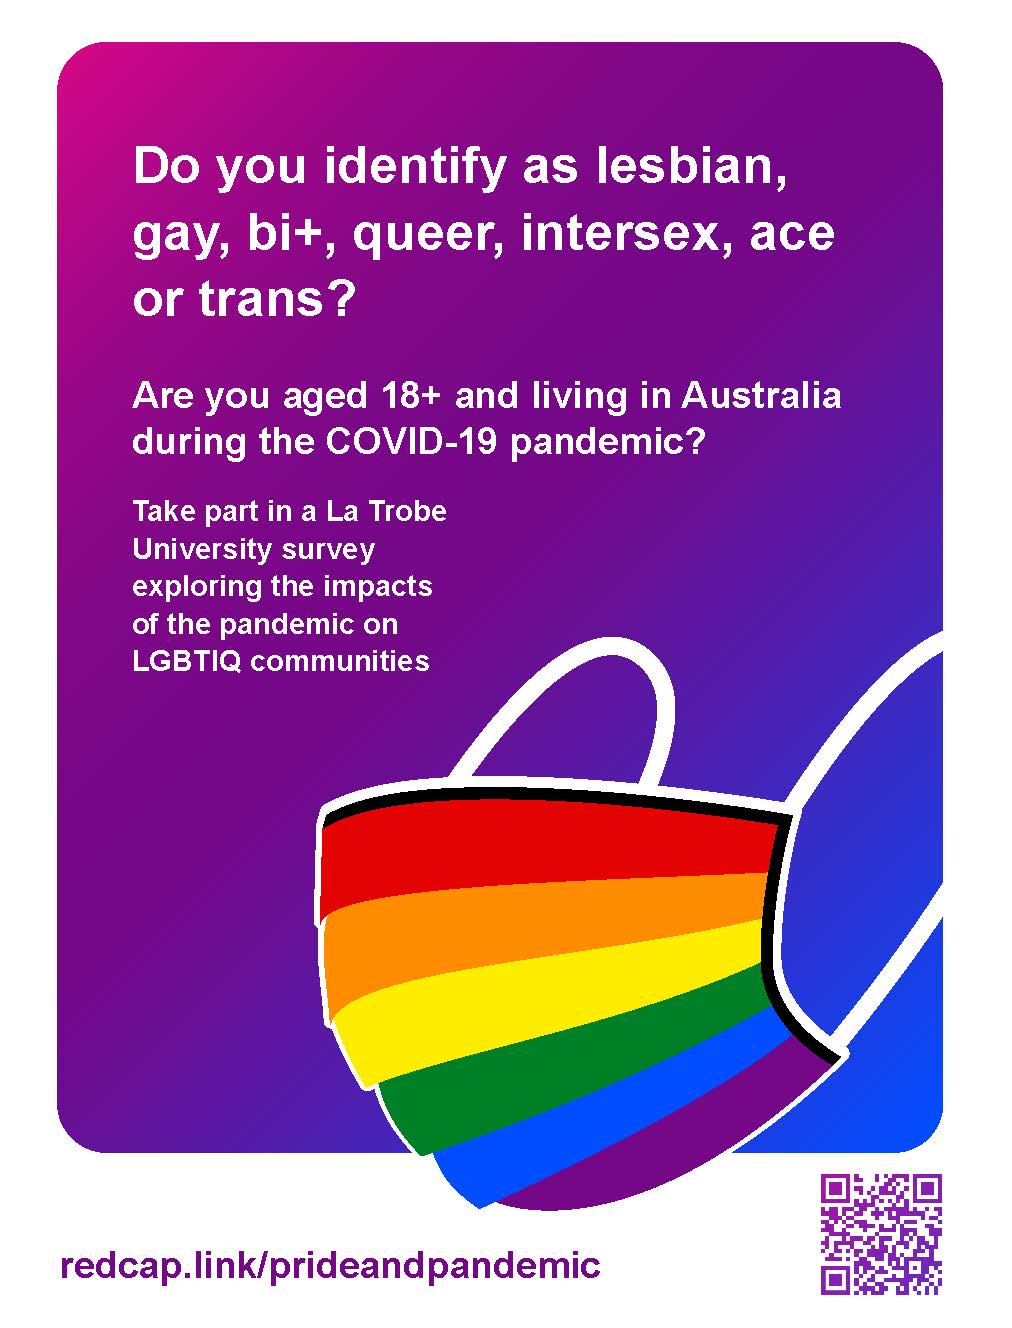 Text 'Do you identify as lesbian, gay, bi+, queer, intersex, ace or trans? Are you 18+ and living in Australia during the COVID-19 pandemic? Take part in a La Trobe University study exploring the impacts of the pandemic on LGBTIQ communities - redcap.link/prideandpandemic' with a QR code and a graphic of a rainbow face mask, all on a purple-to-blue gradient background